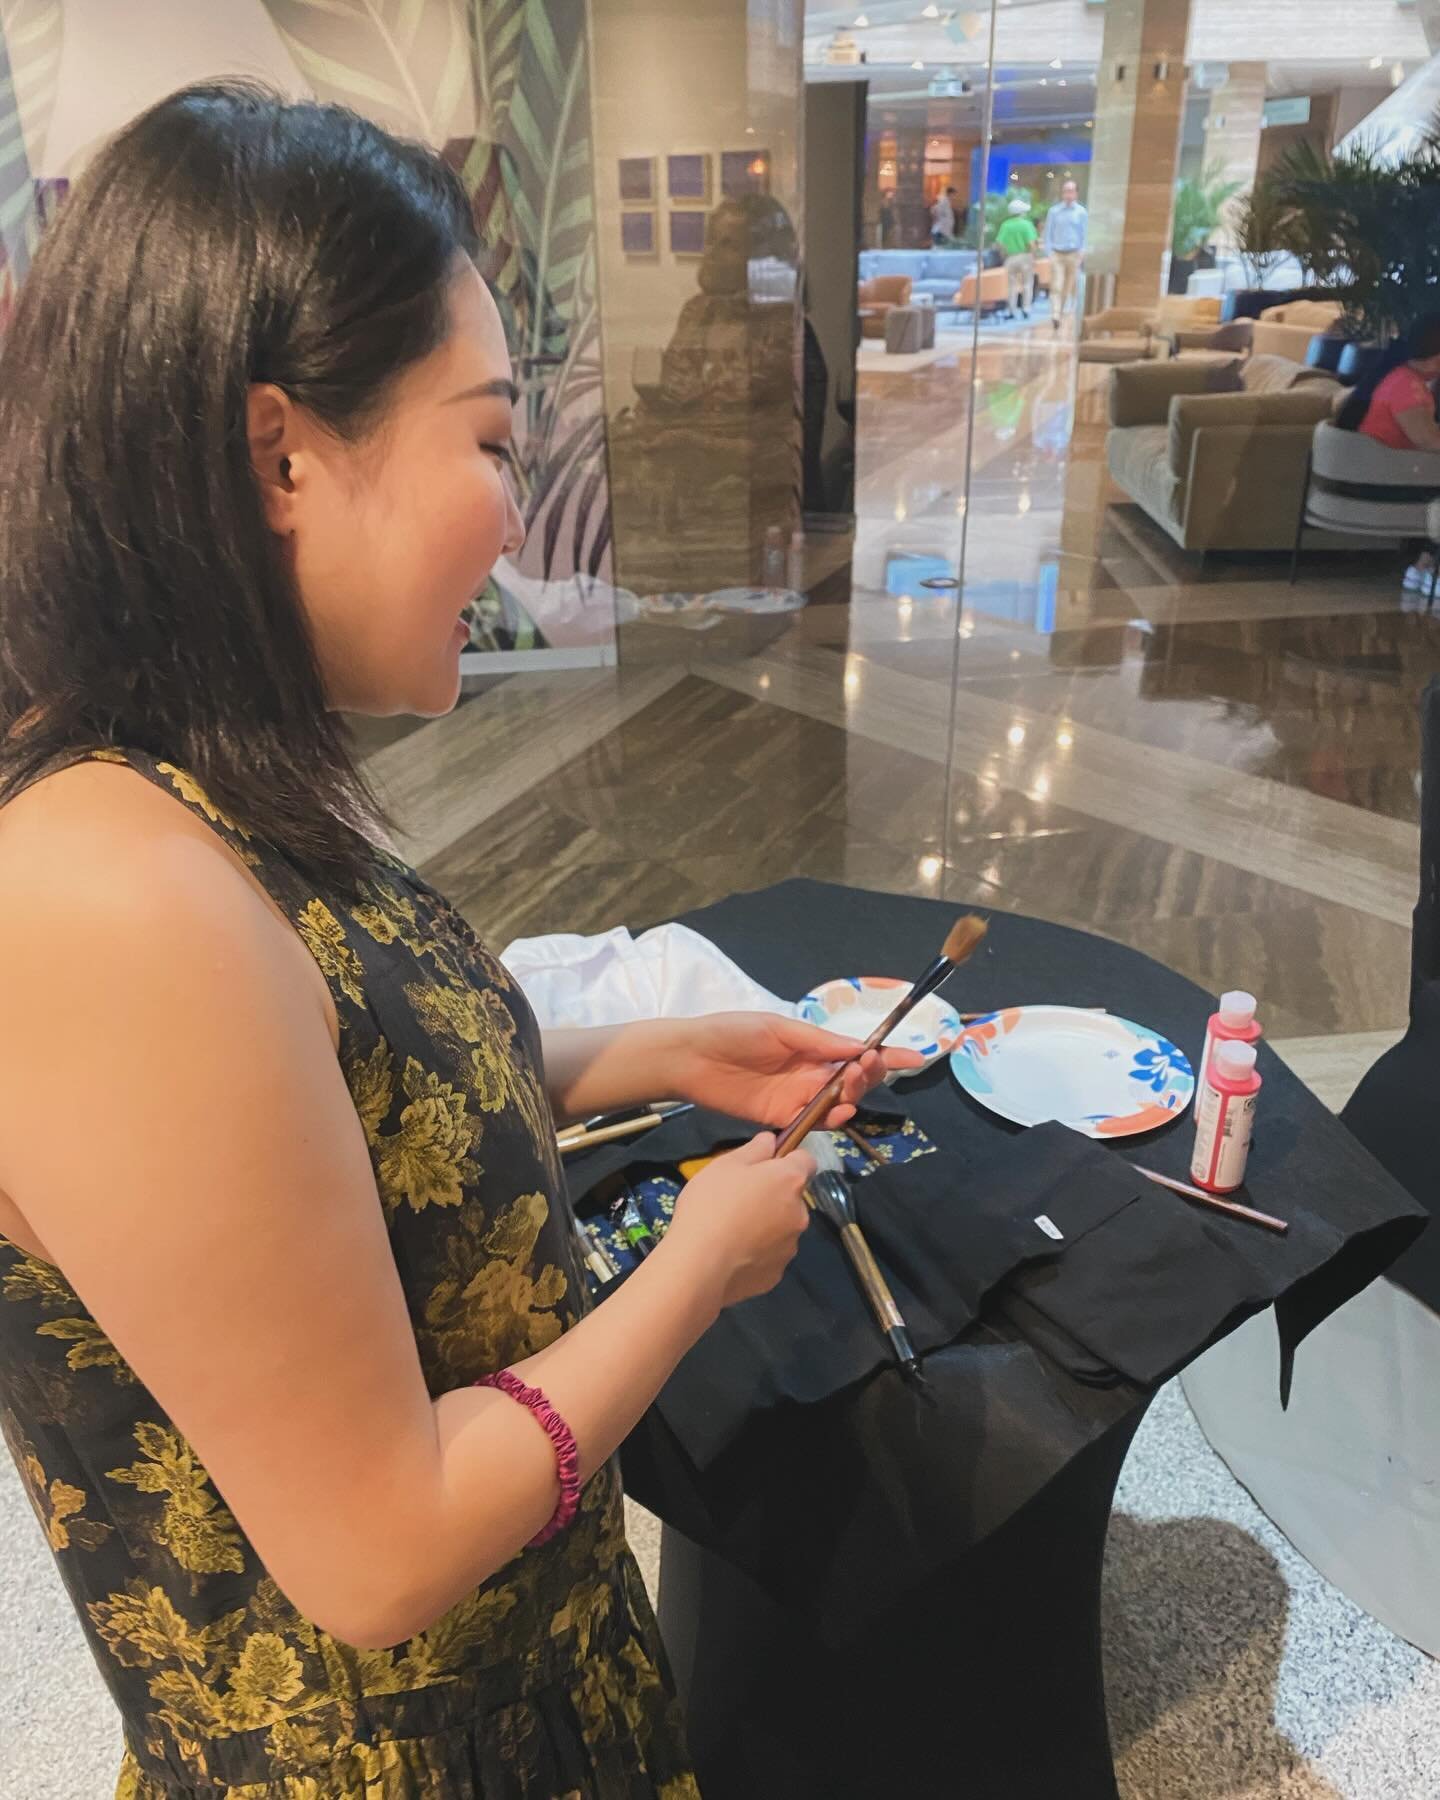 Must be Monday! We welcome @x.f.queen to Noche de Arte for May Artist in Residence. Come by @interconmiami to learn more about this #swatchwatch artist and  #umstudent #soloexhibition #miamiartist #chineseartist @downtownmia @visitmiami